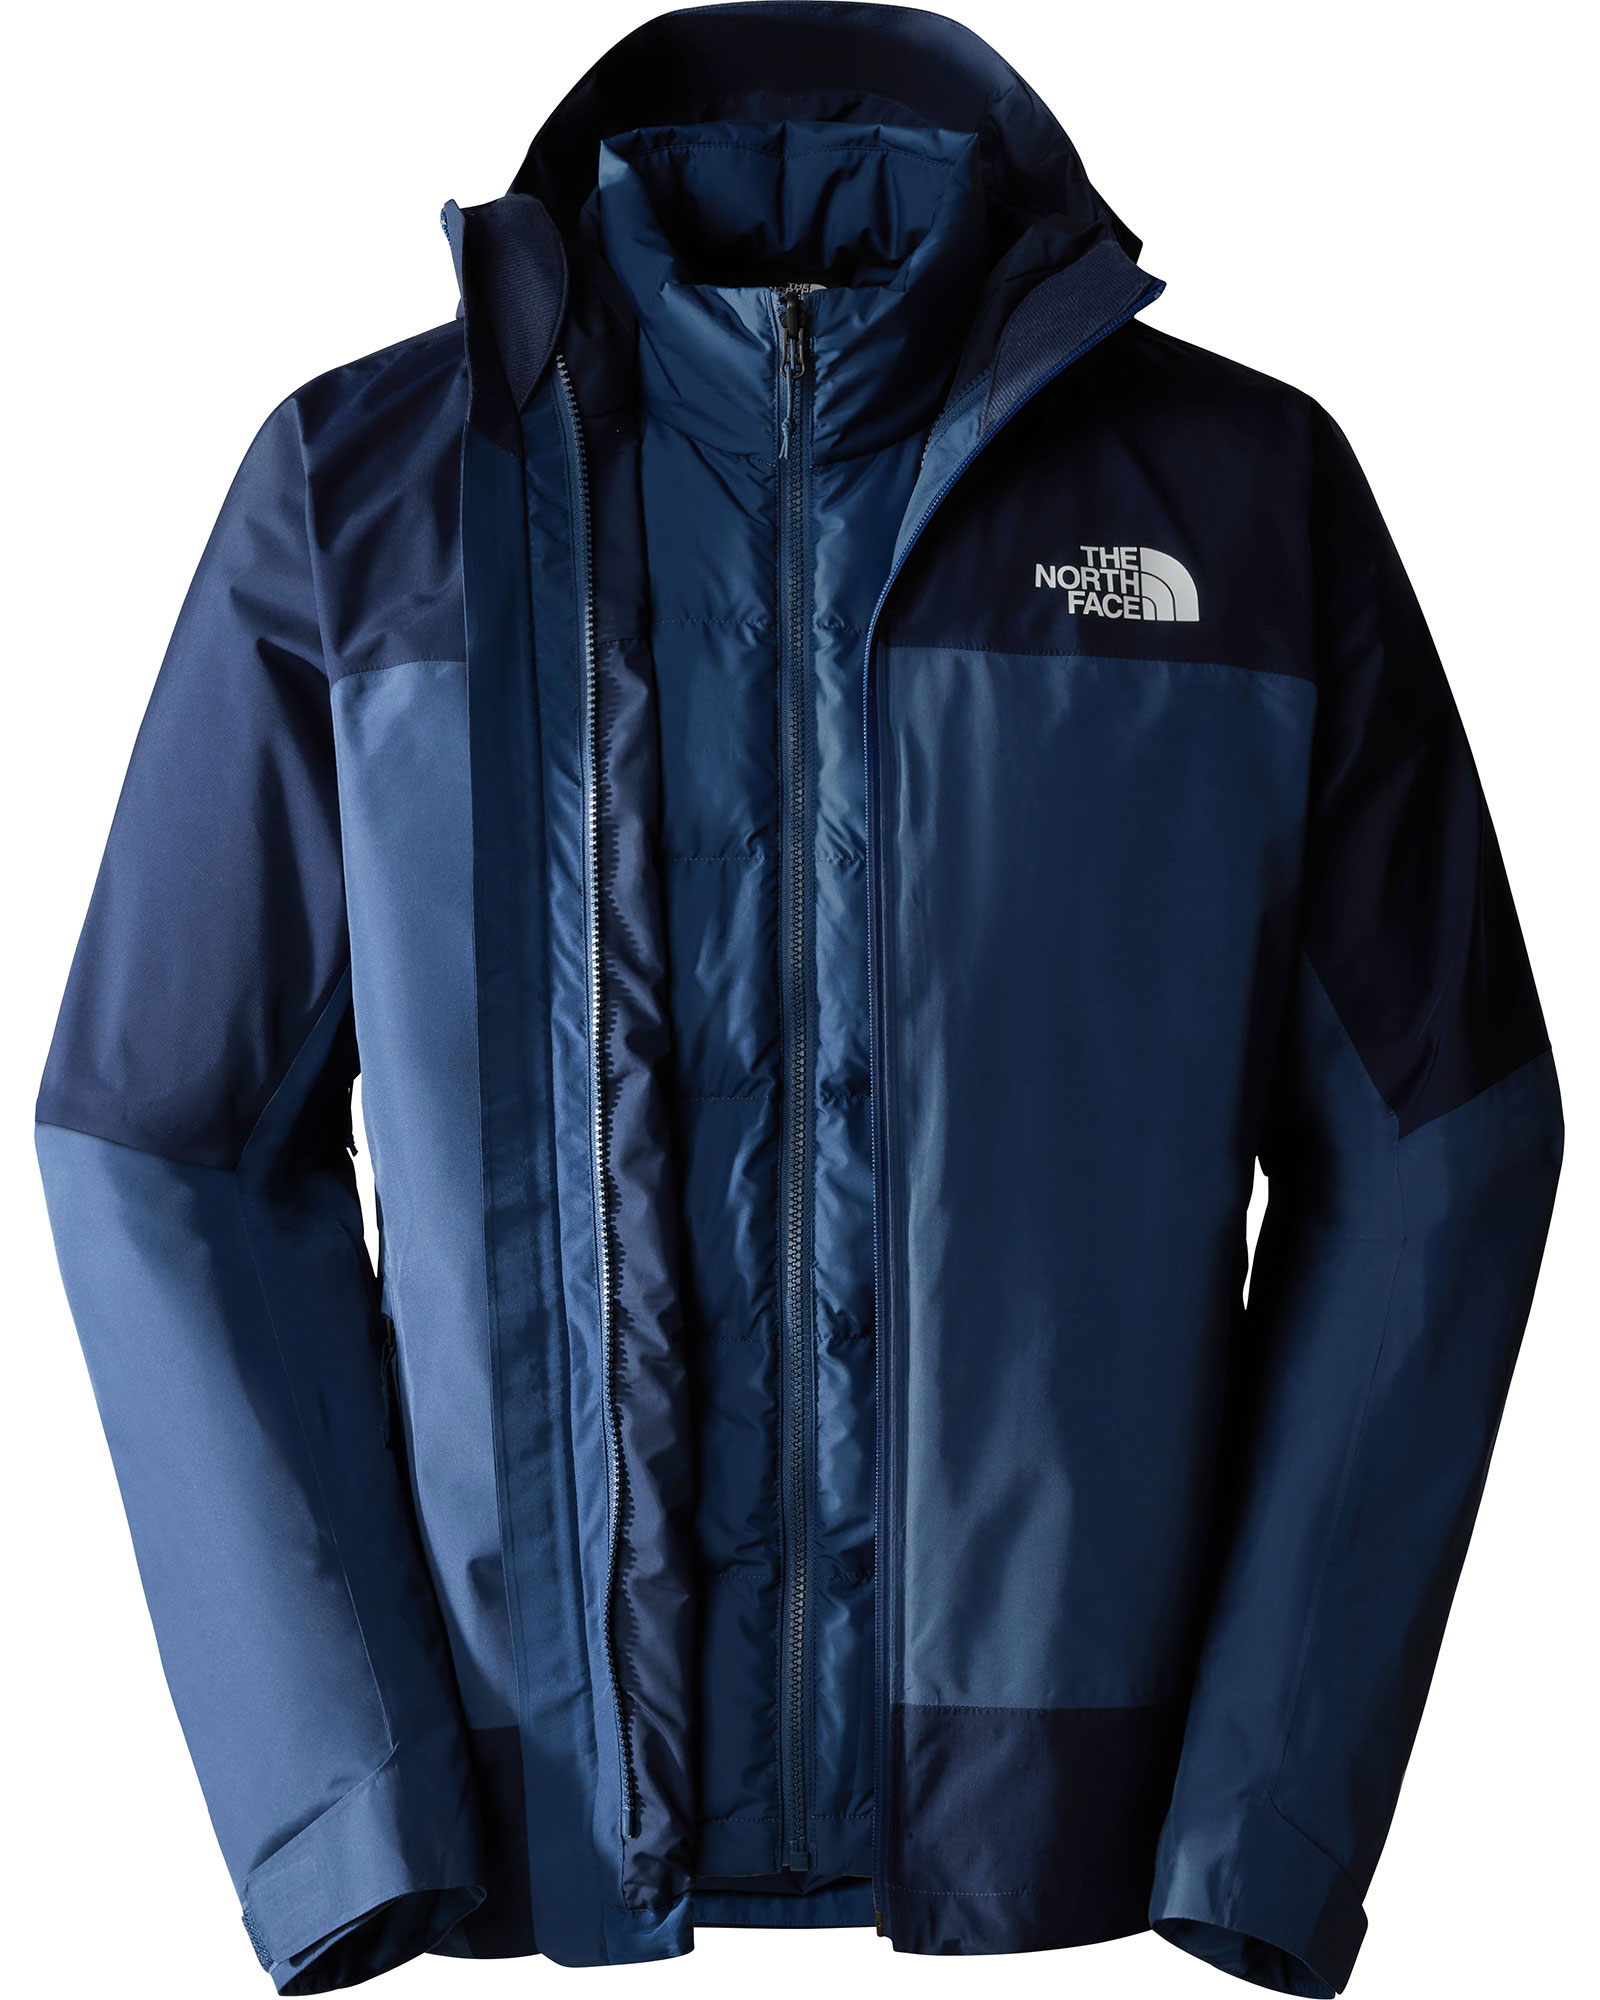 The North Face Men's Mountain Light Triclimate GORE-TEX Jacket